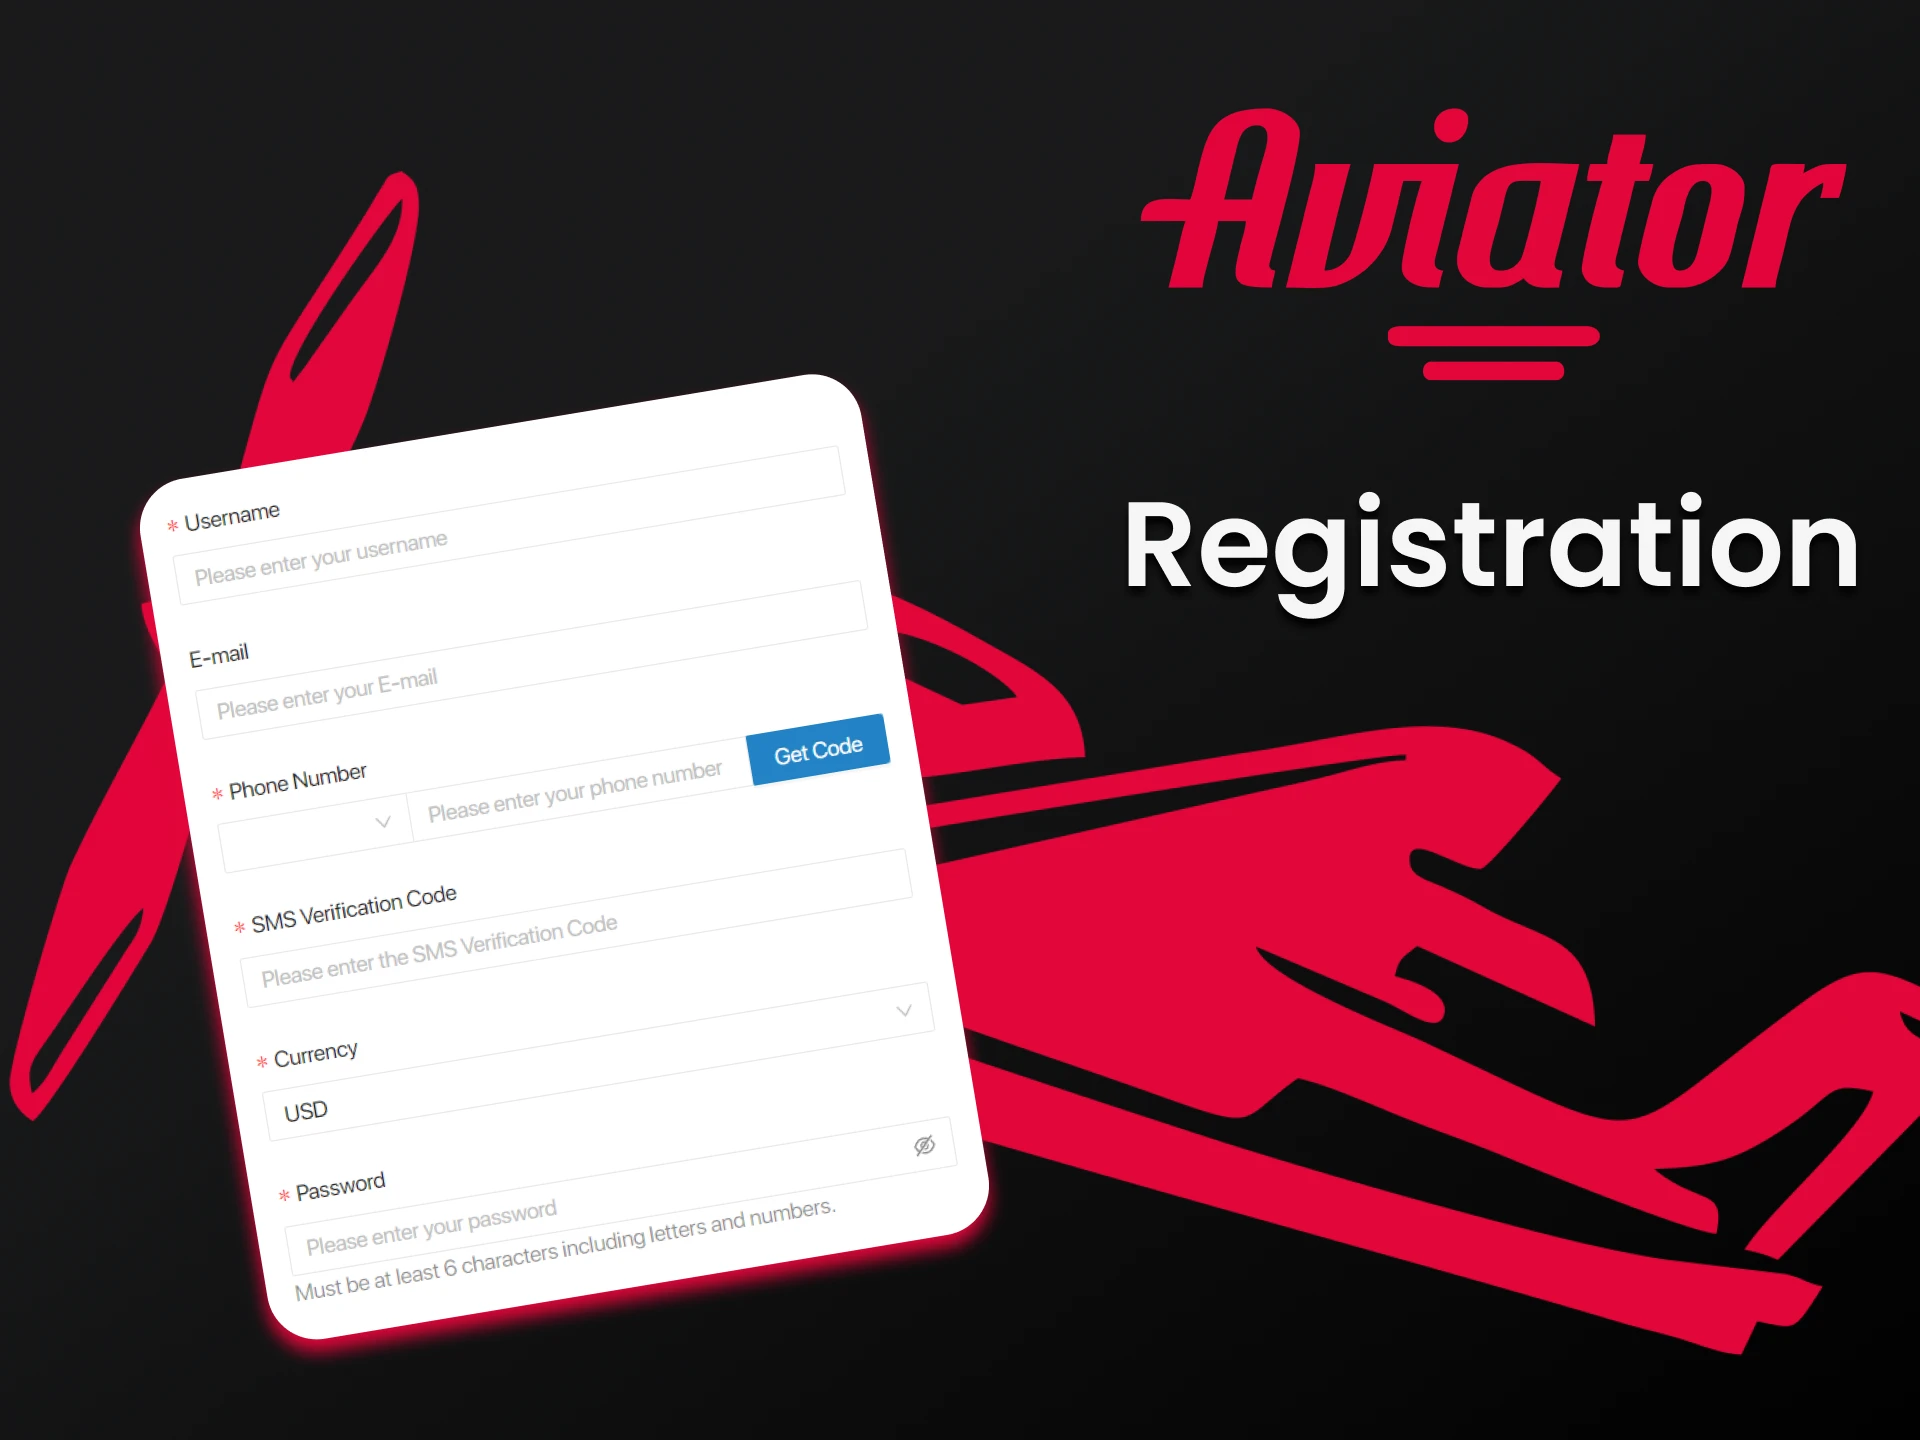 In order to start playing Aviator, you need to go through the registration procedure.